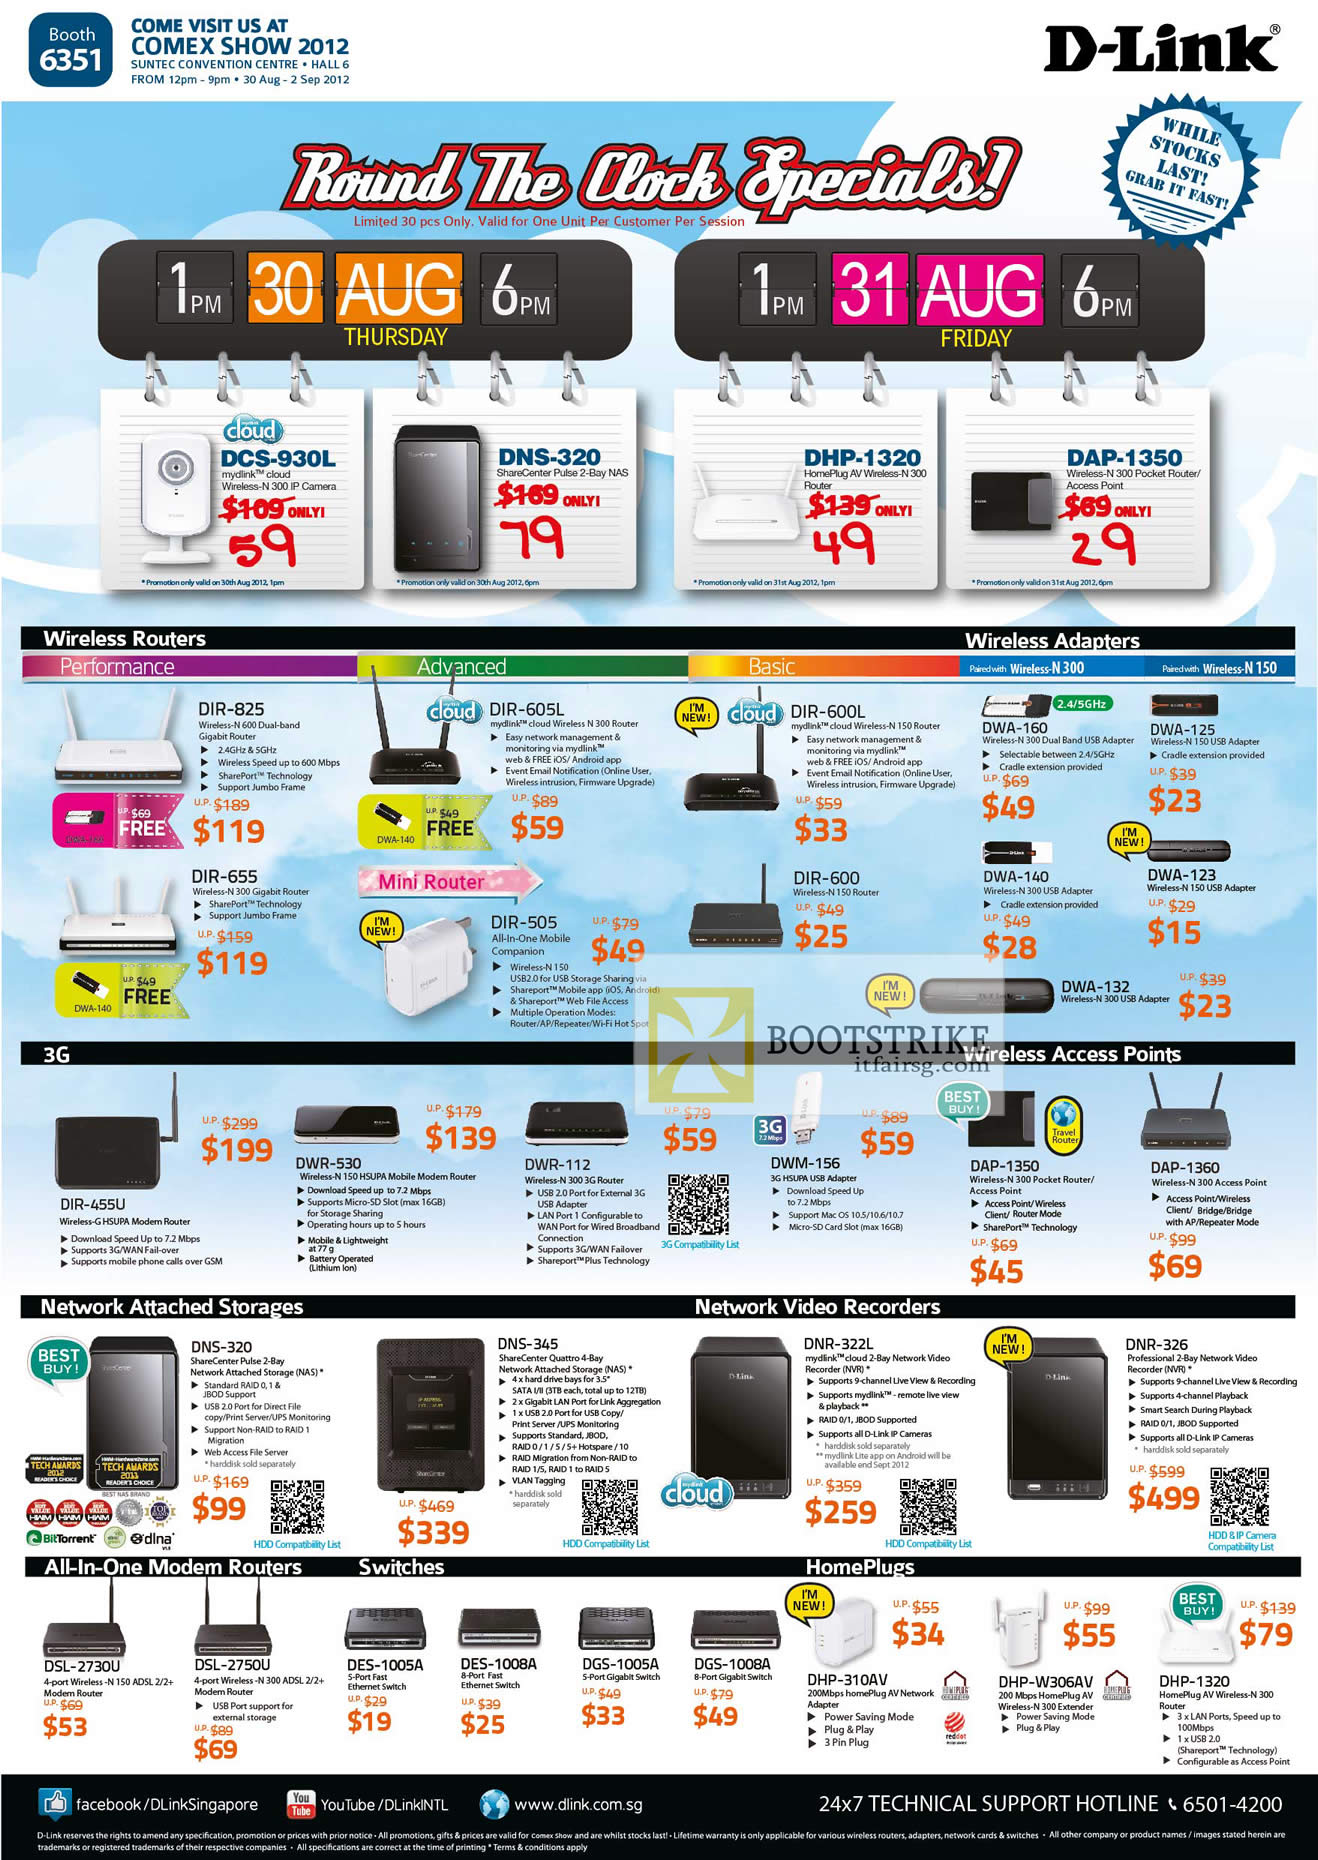 COMEX 2012 price list image brochure of D-Link Networking Hourly Deals, Routers DIR, Wireless Adapters, 3G Router DWR, NAS DNS, Network Video Recorders DNR, Modem DSL, Switches DES, HomePlug DHP